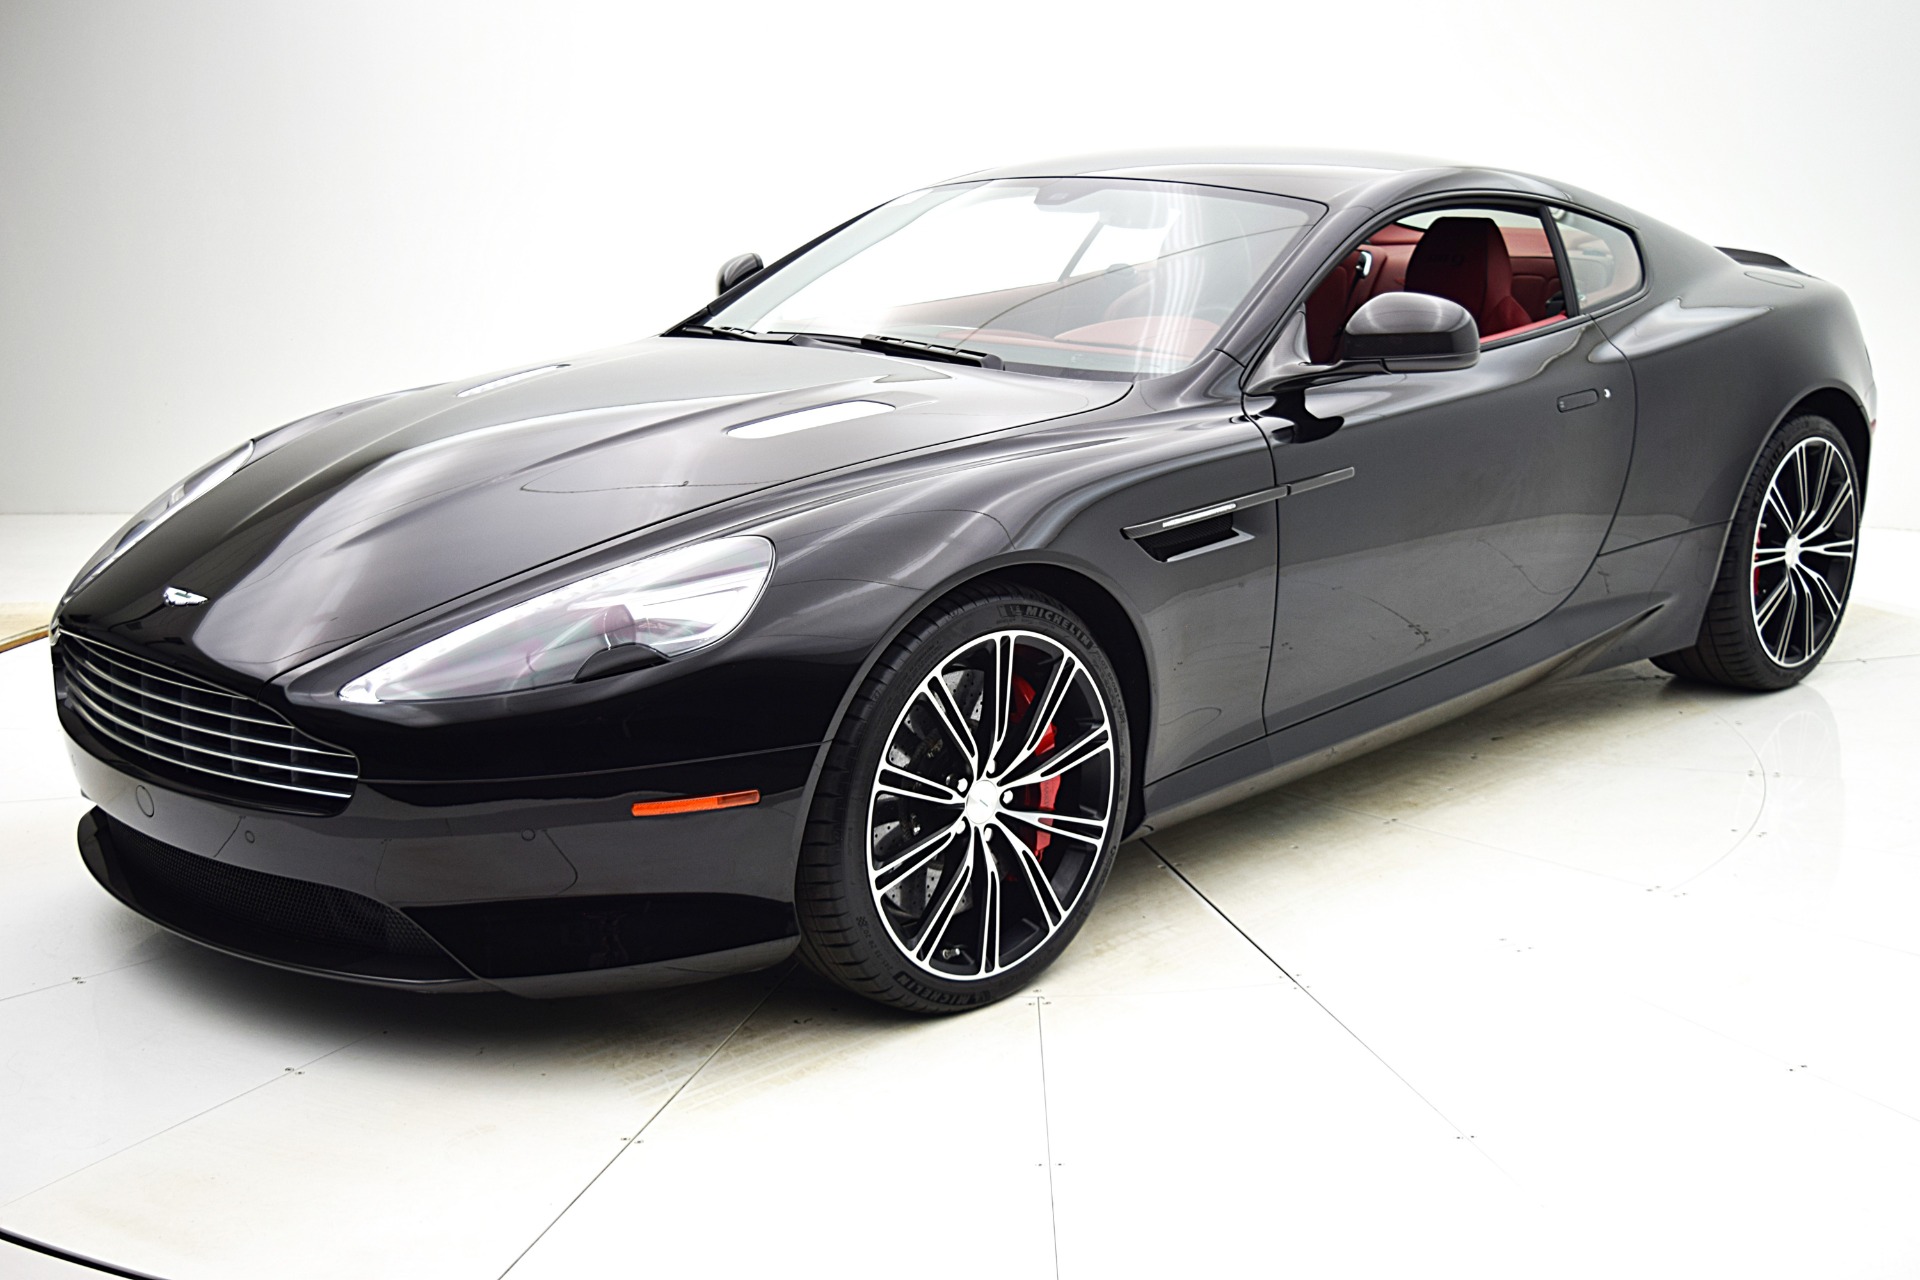 Used 2015 Aston Martin DB9 Carbon Edition for sale Sold at Bentley Palmyra N.J. in Palmyra NJ 08065 2